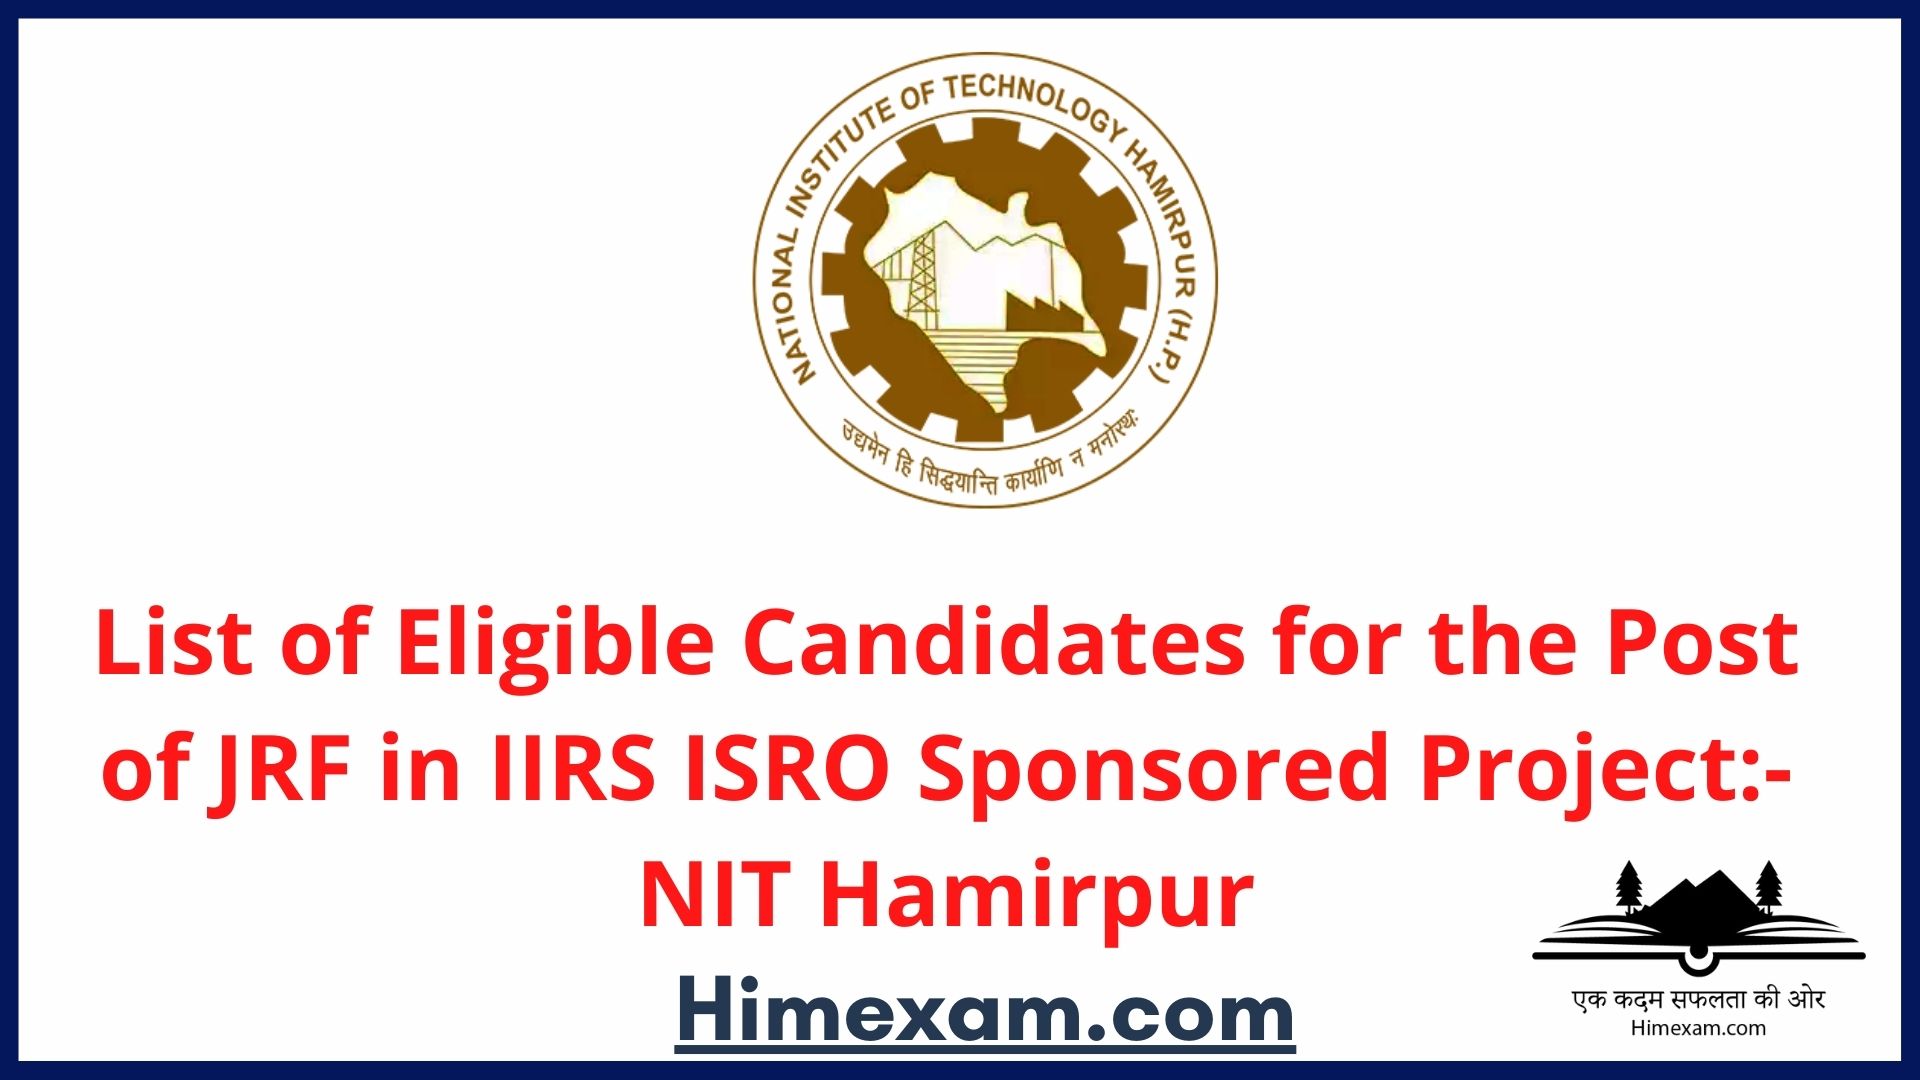 List of Eligible Candidates for the Post of JRF in IIRS ISRO Sponsored Project:- NIT Hamirpur